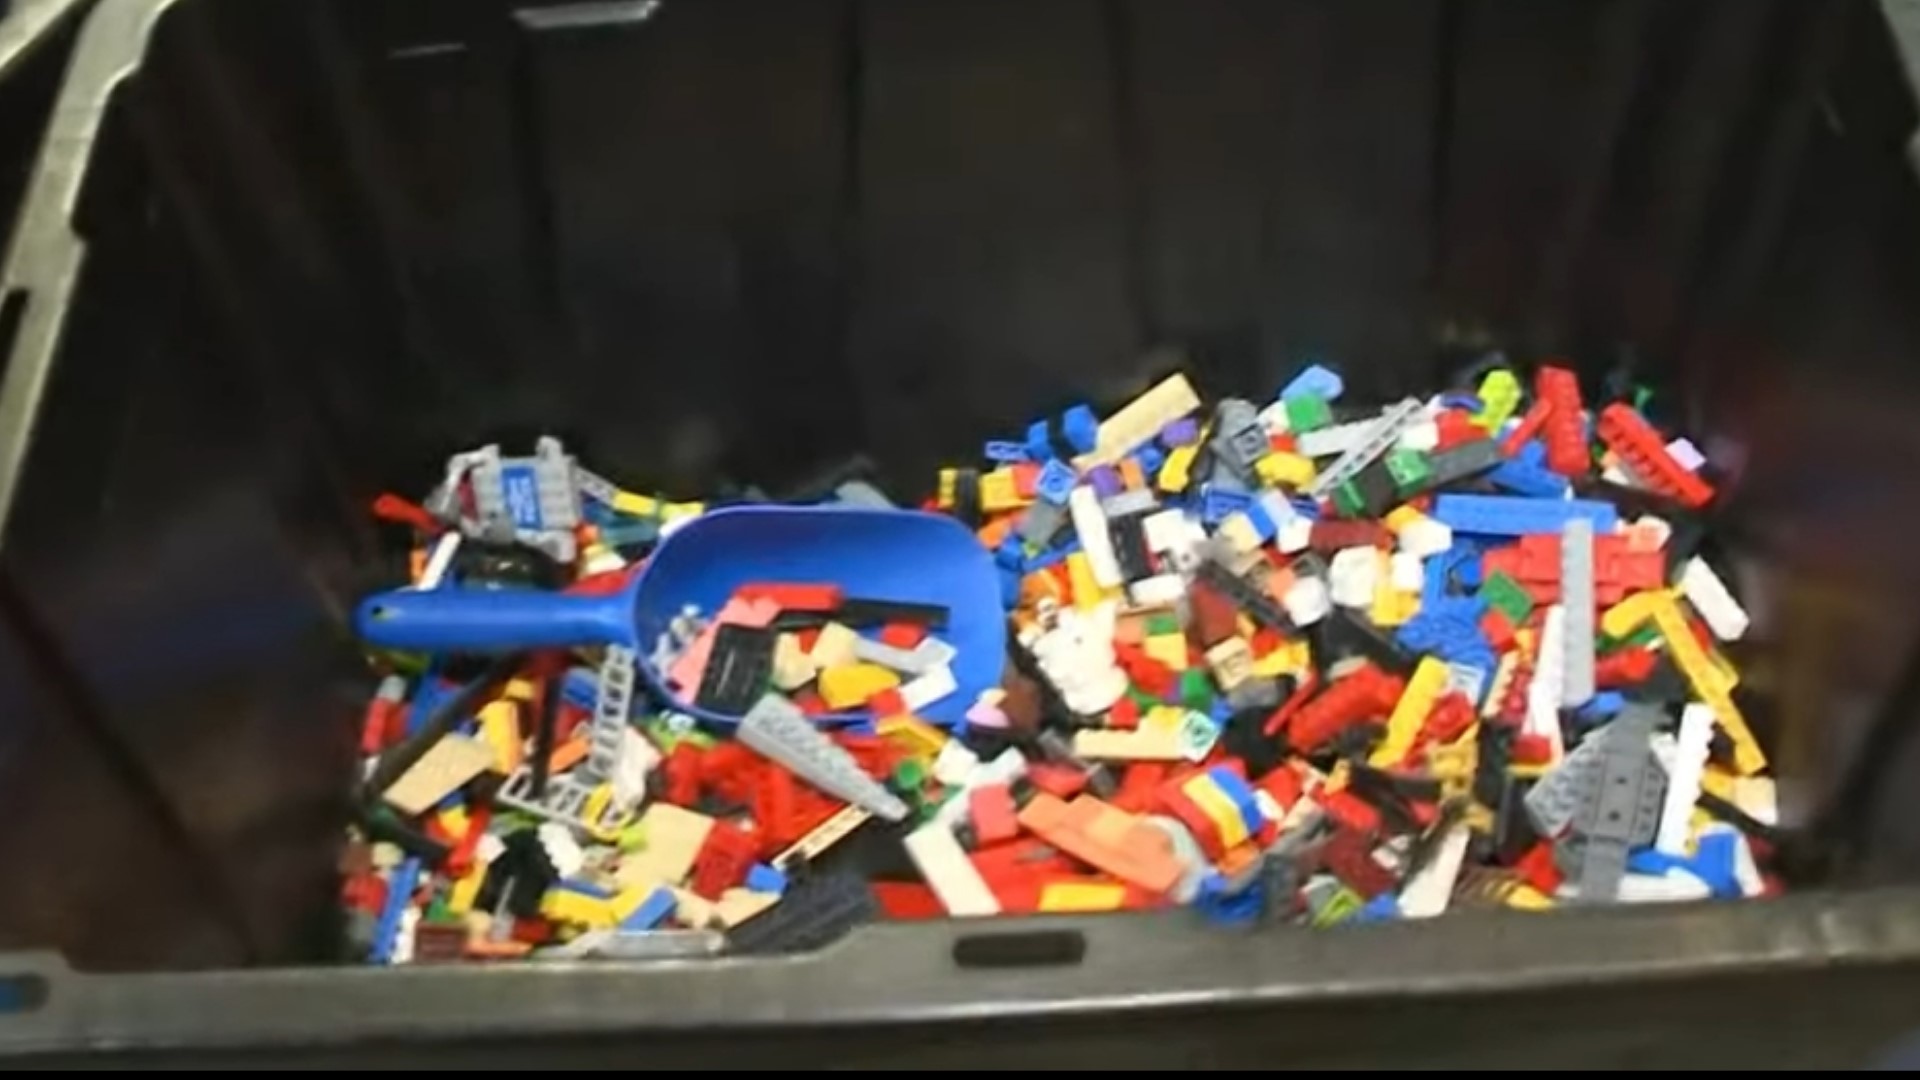 The suspect allegedly stole over 200 LEGO sets from retail stores in the East Valley, court records show.